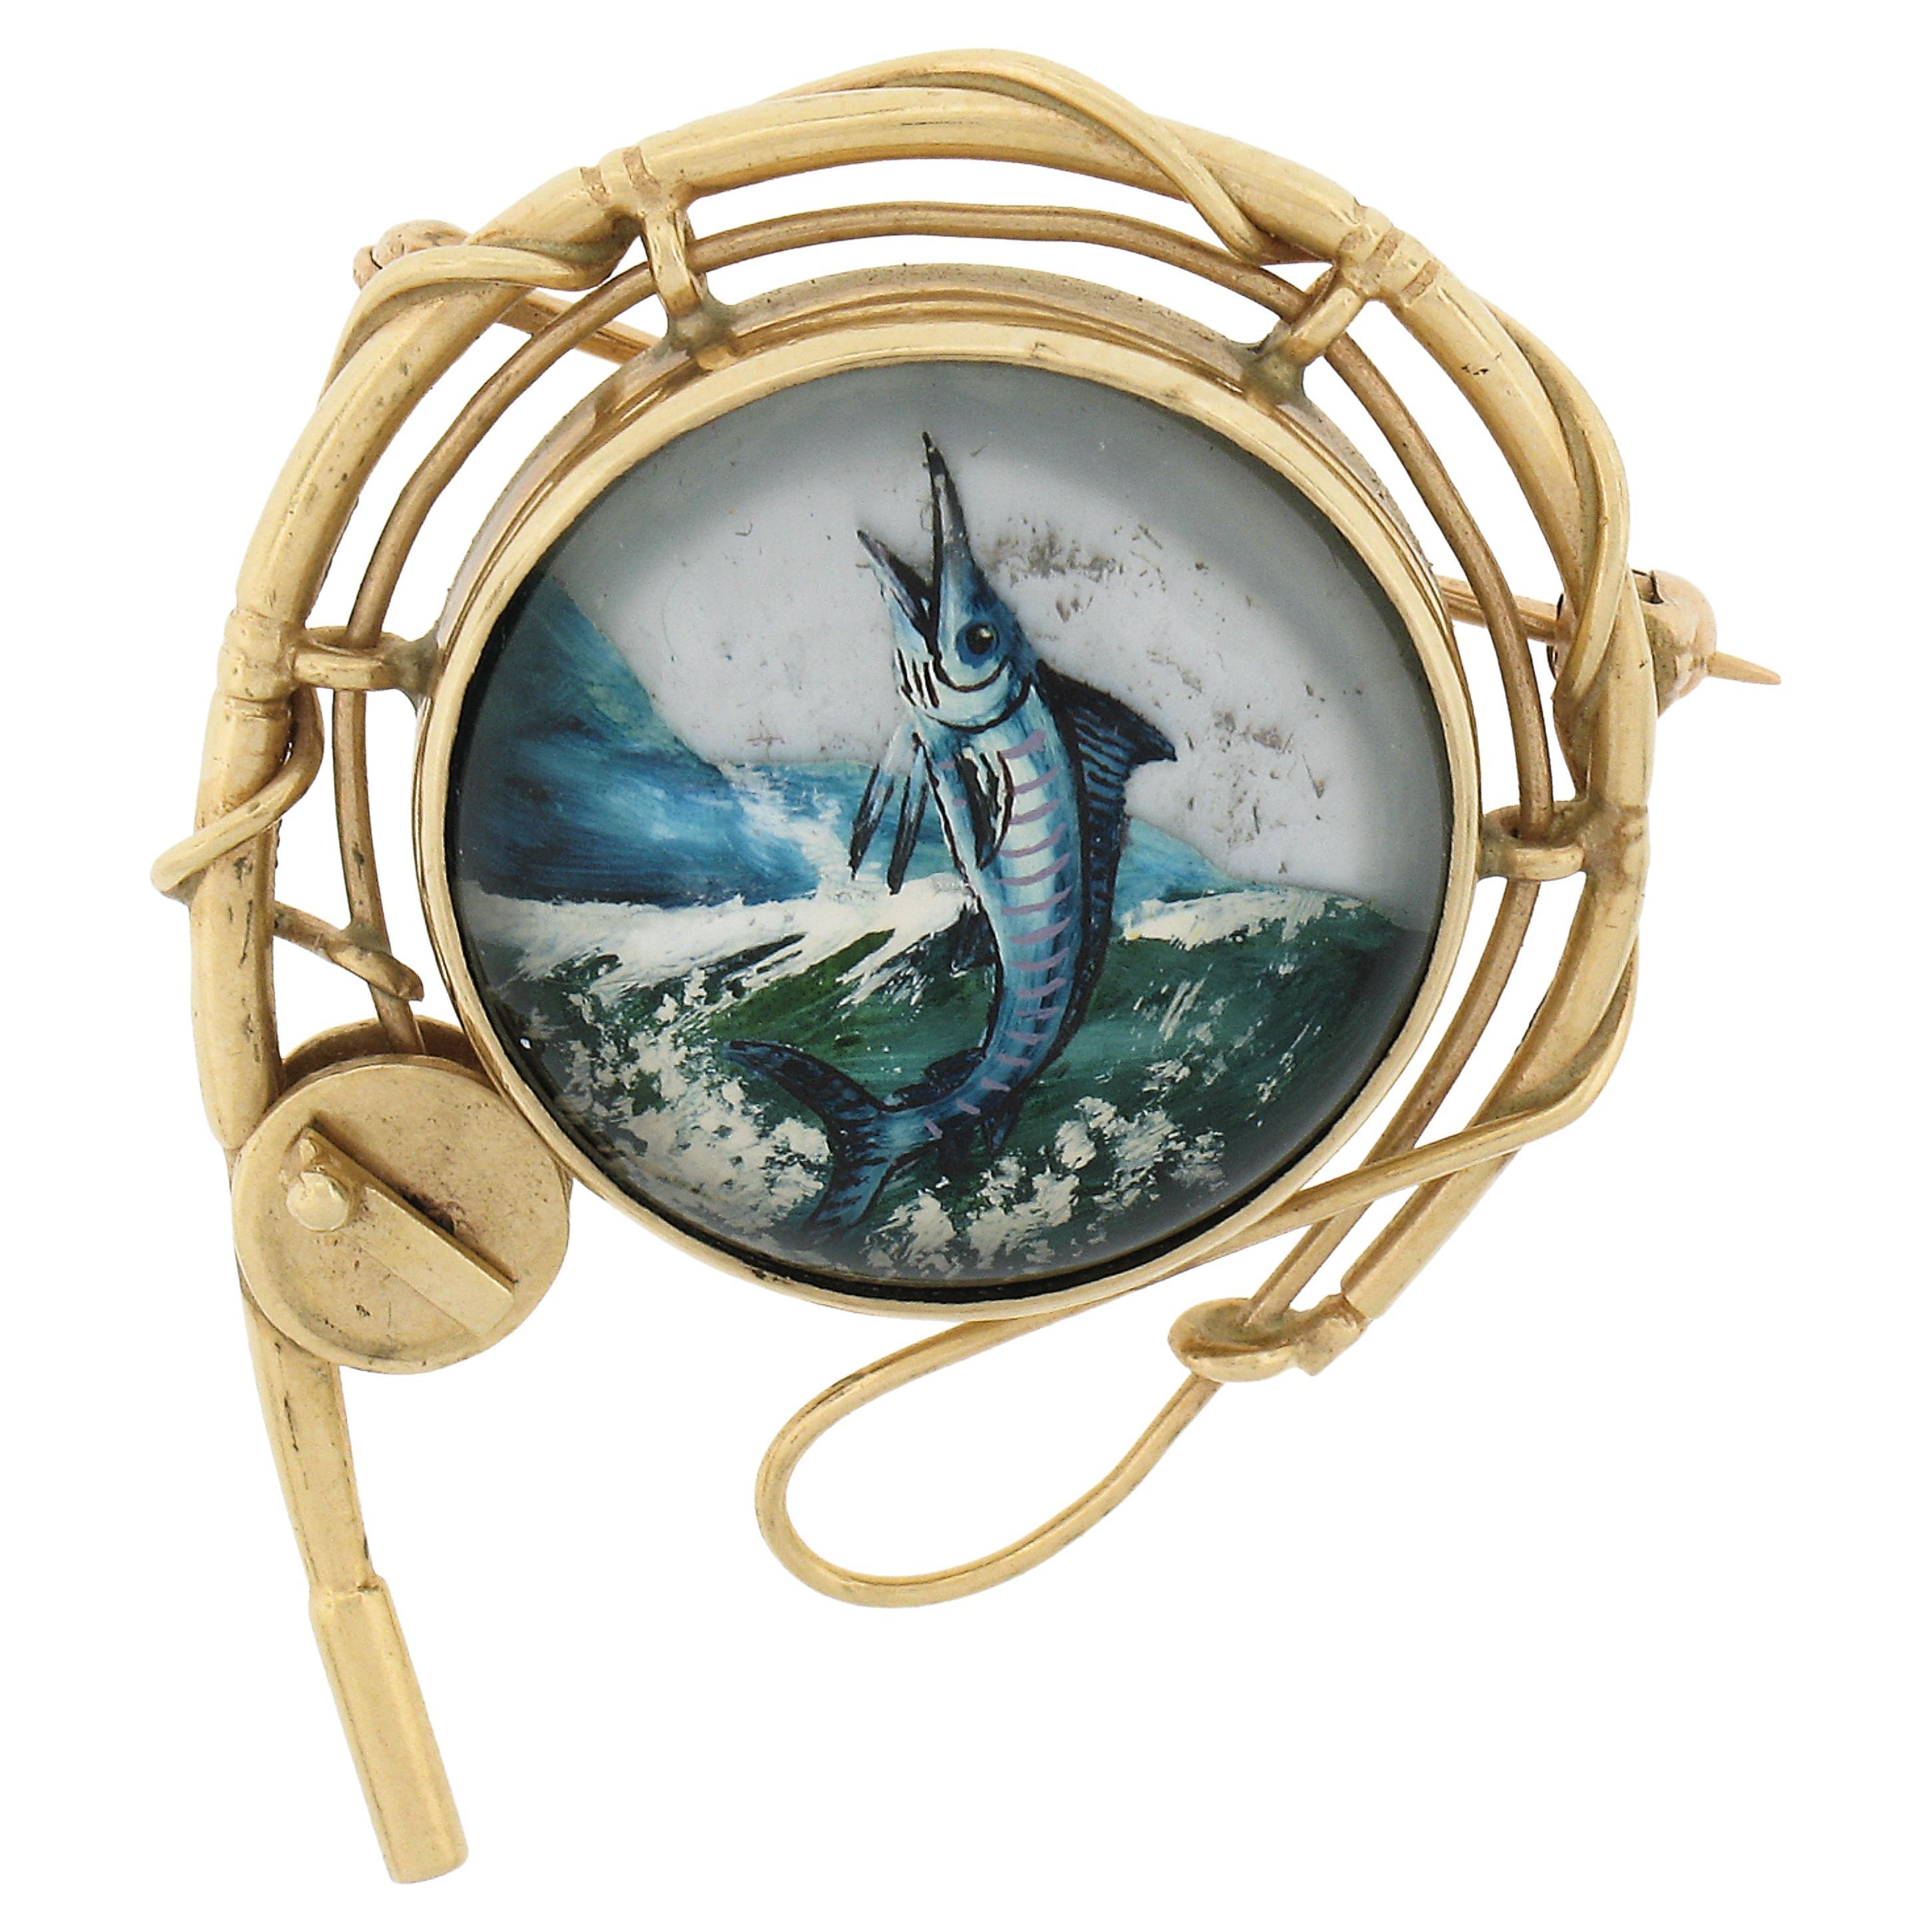 14k Gold Reverse Painted Marlin Fish Intaglio w/ Fishing Pole Frame Pin Brooch